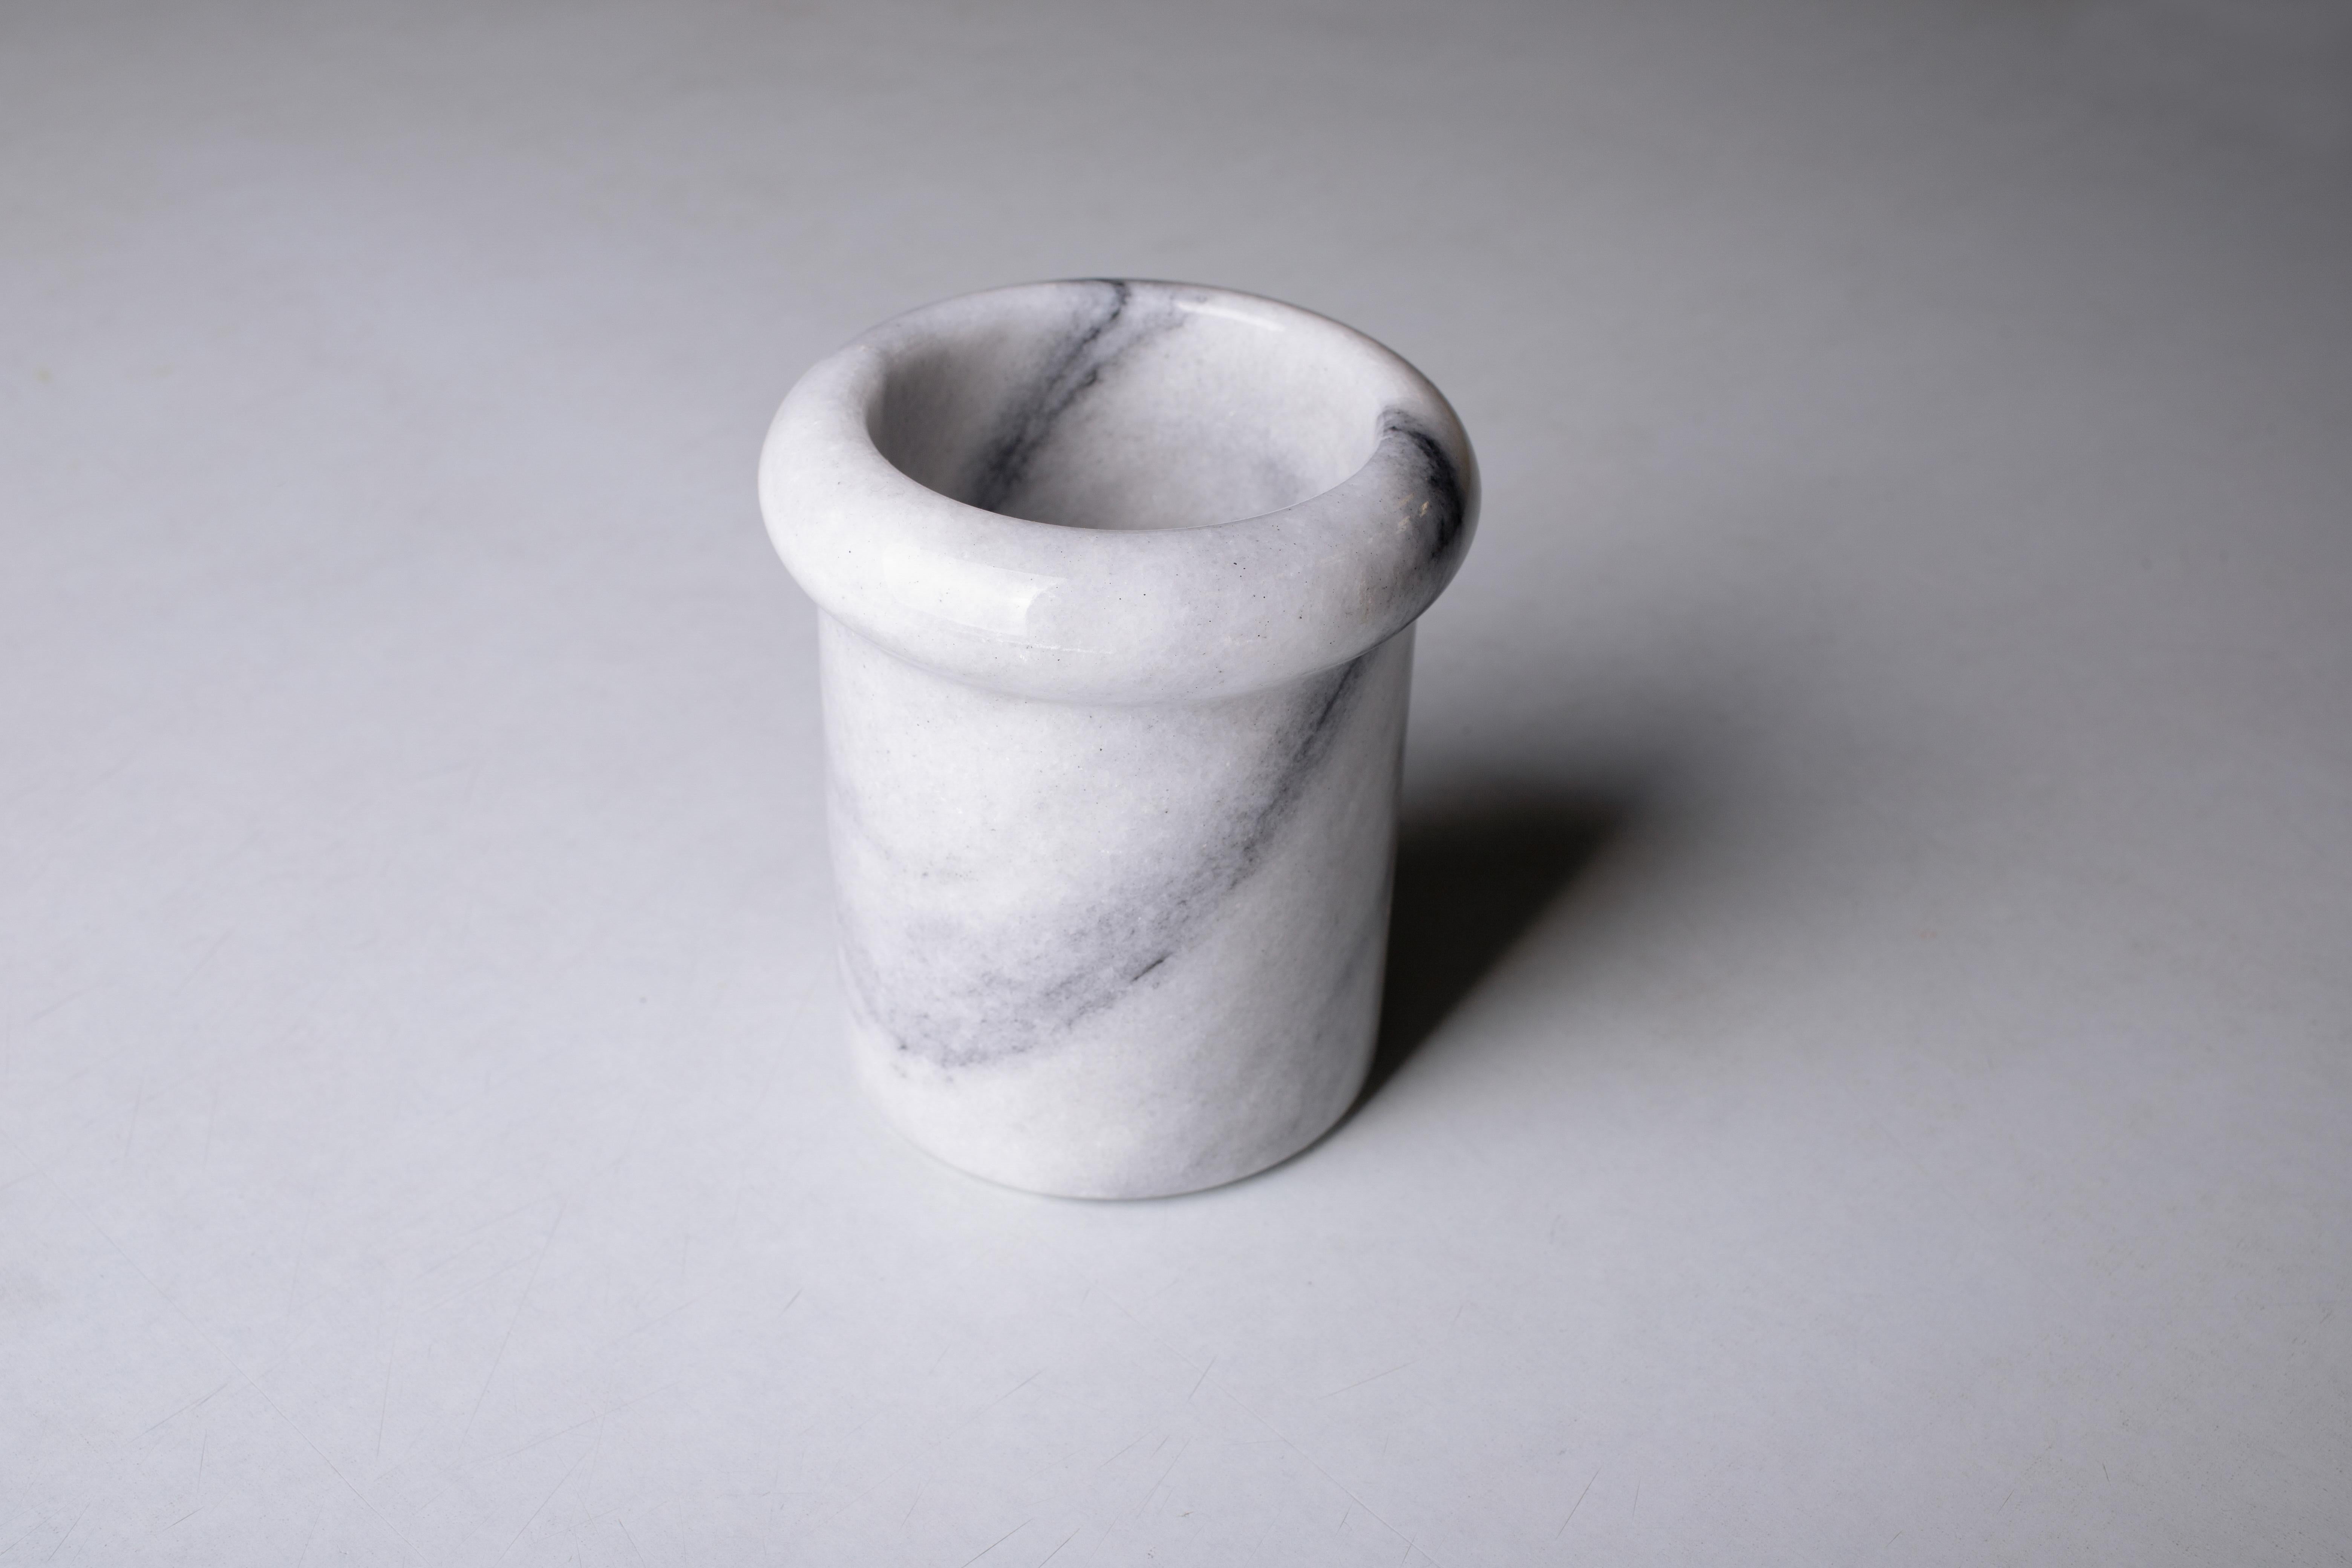 Adorable vintage carrara marble vase from the 1970s, Italy. Vertically oriented cylindrical form with a pencil round overhanging lip at the top opening.